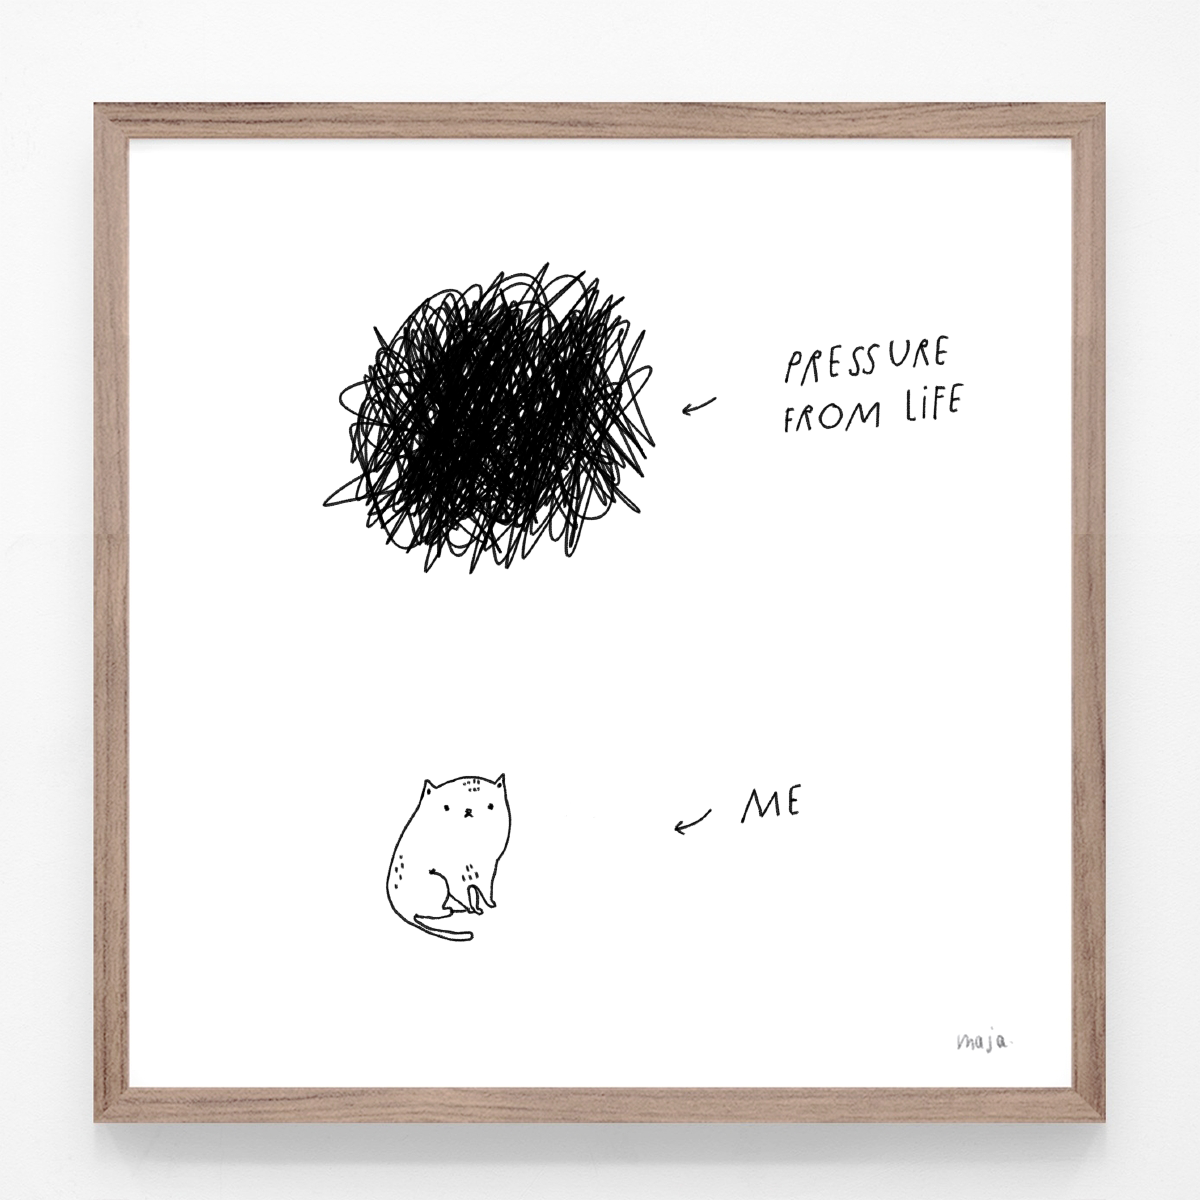 Pressure from life - print